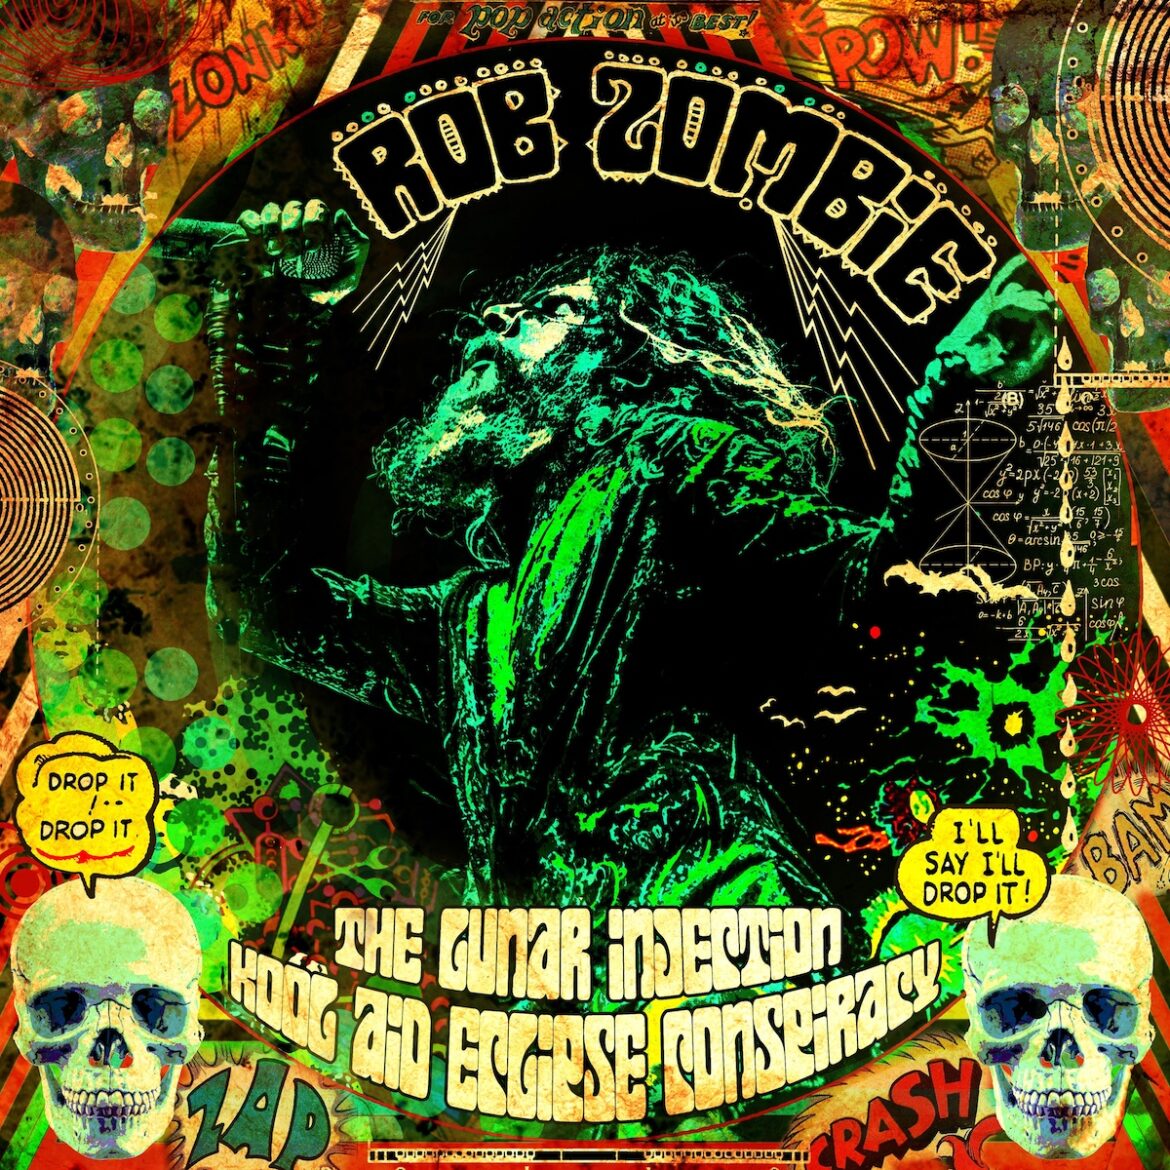 ROCKET REVIEW: ROB ZOMBIE – “The Lunar Injection Kool Aid Eclipse Conspiracy” (CD)